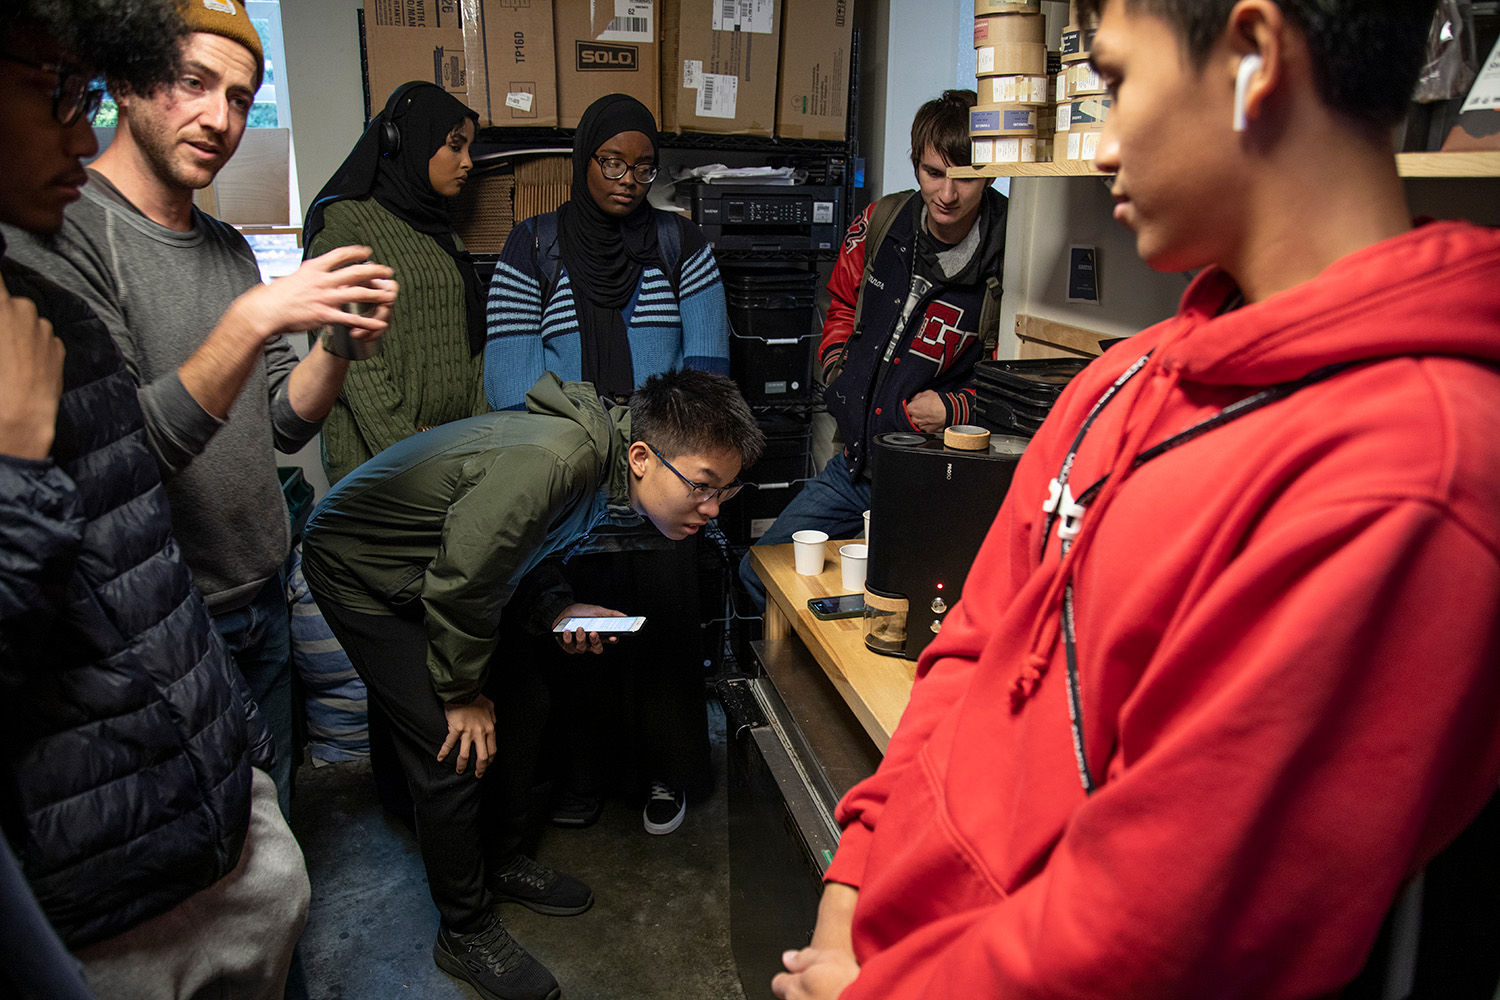 Lander Coffee owner Dustin Johnson talks to a group of students. Johnson is on the left side of the frame. A group of six students form a semi-circle around him. One student has leaned forward to watch as coffee beans get ground in a grinder.